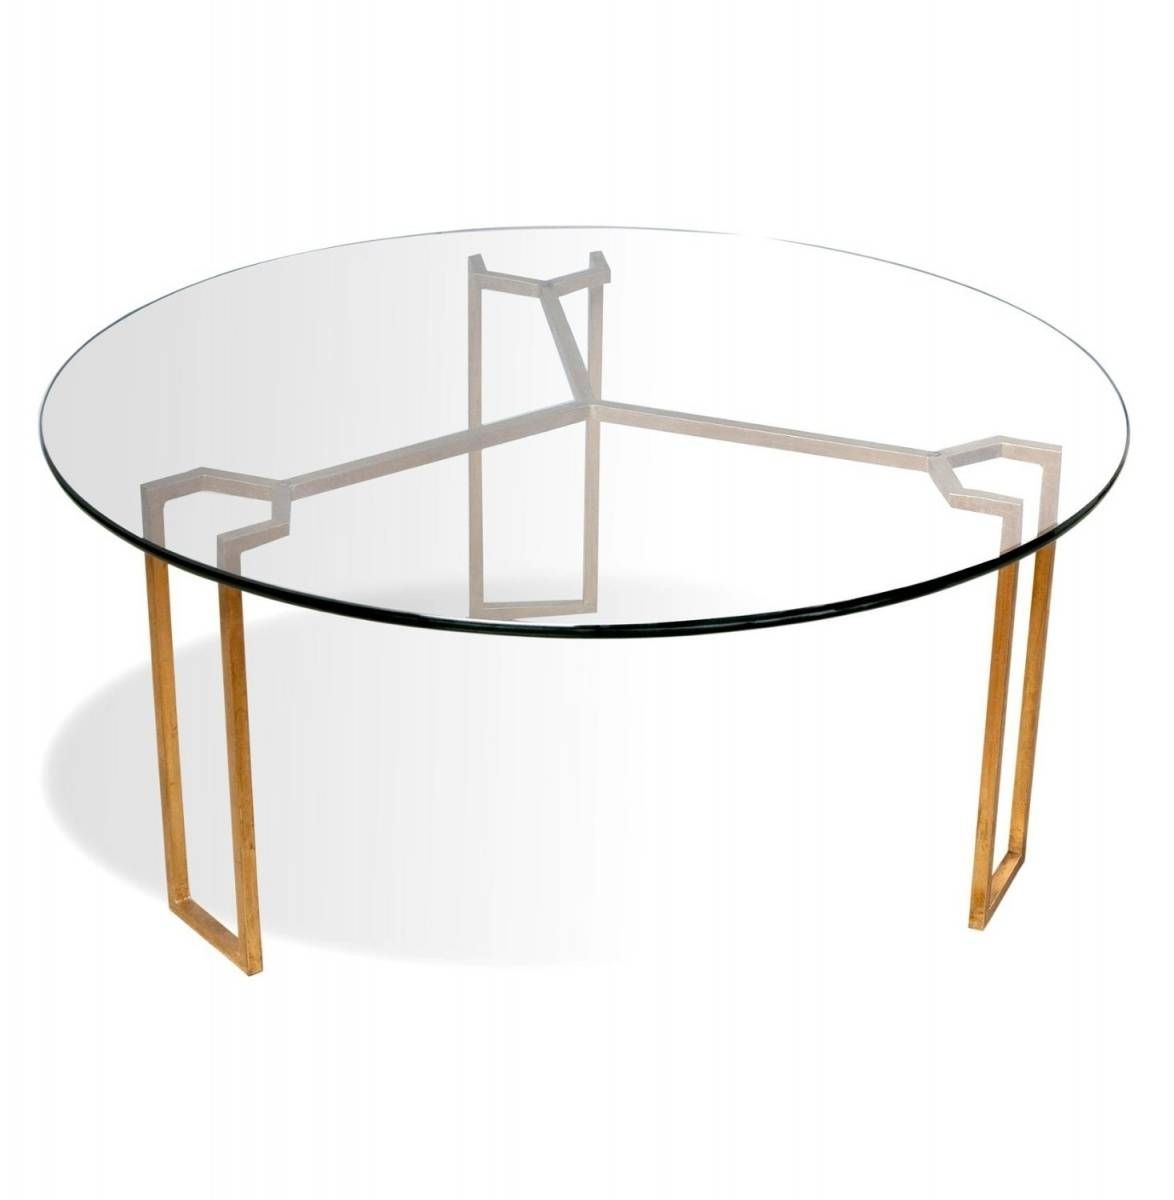 Coffee Table : Glass Round Coffee Tables Small Round Glass Coffee With Glass Circle Coffee Tables (View 2 of 30)